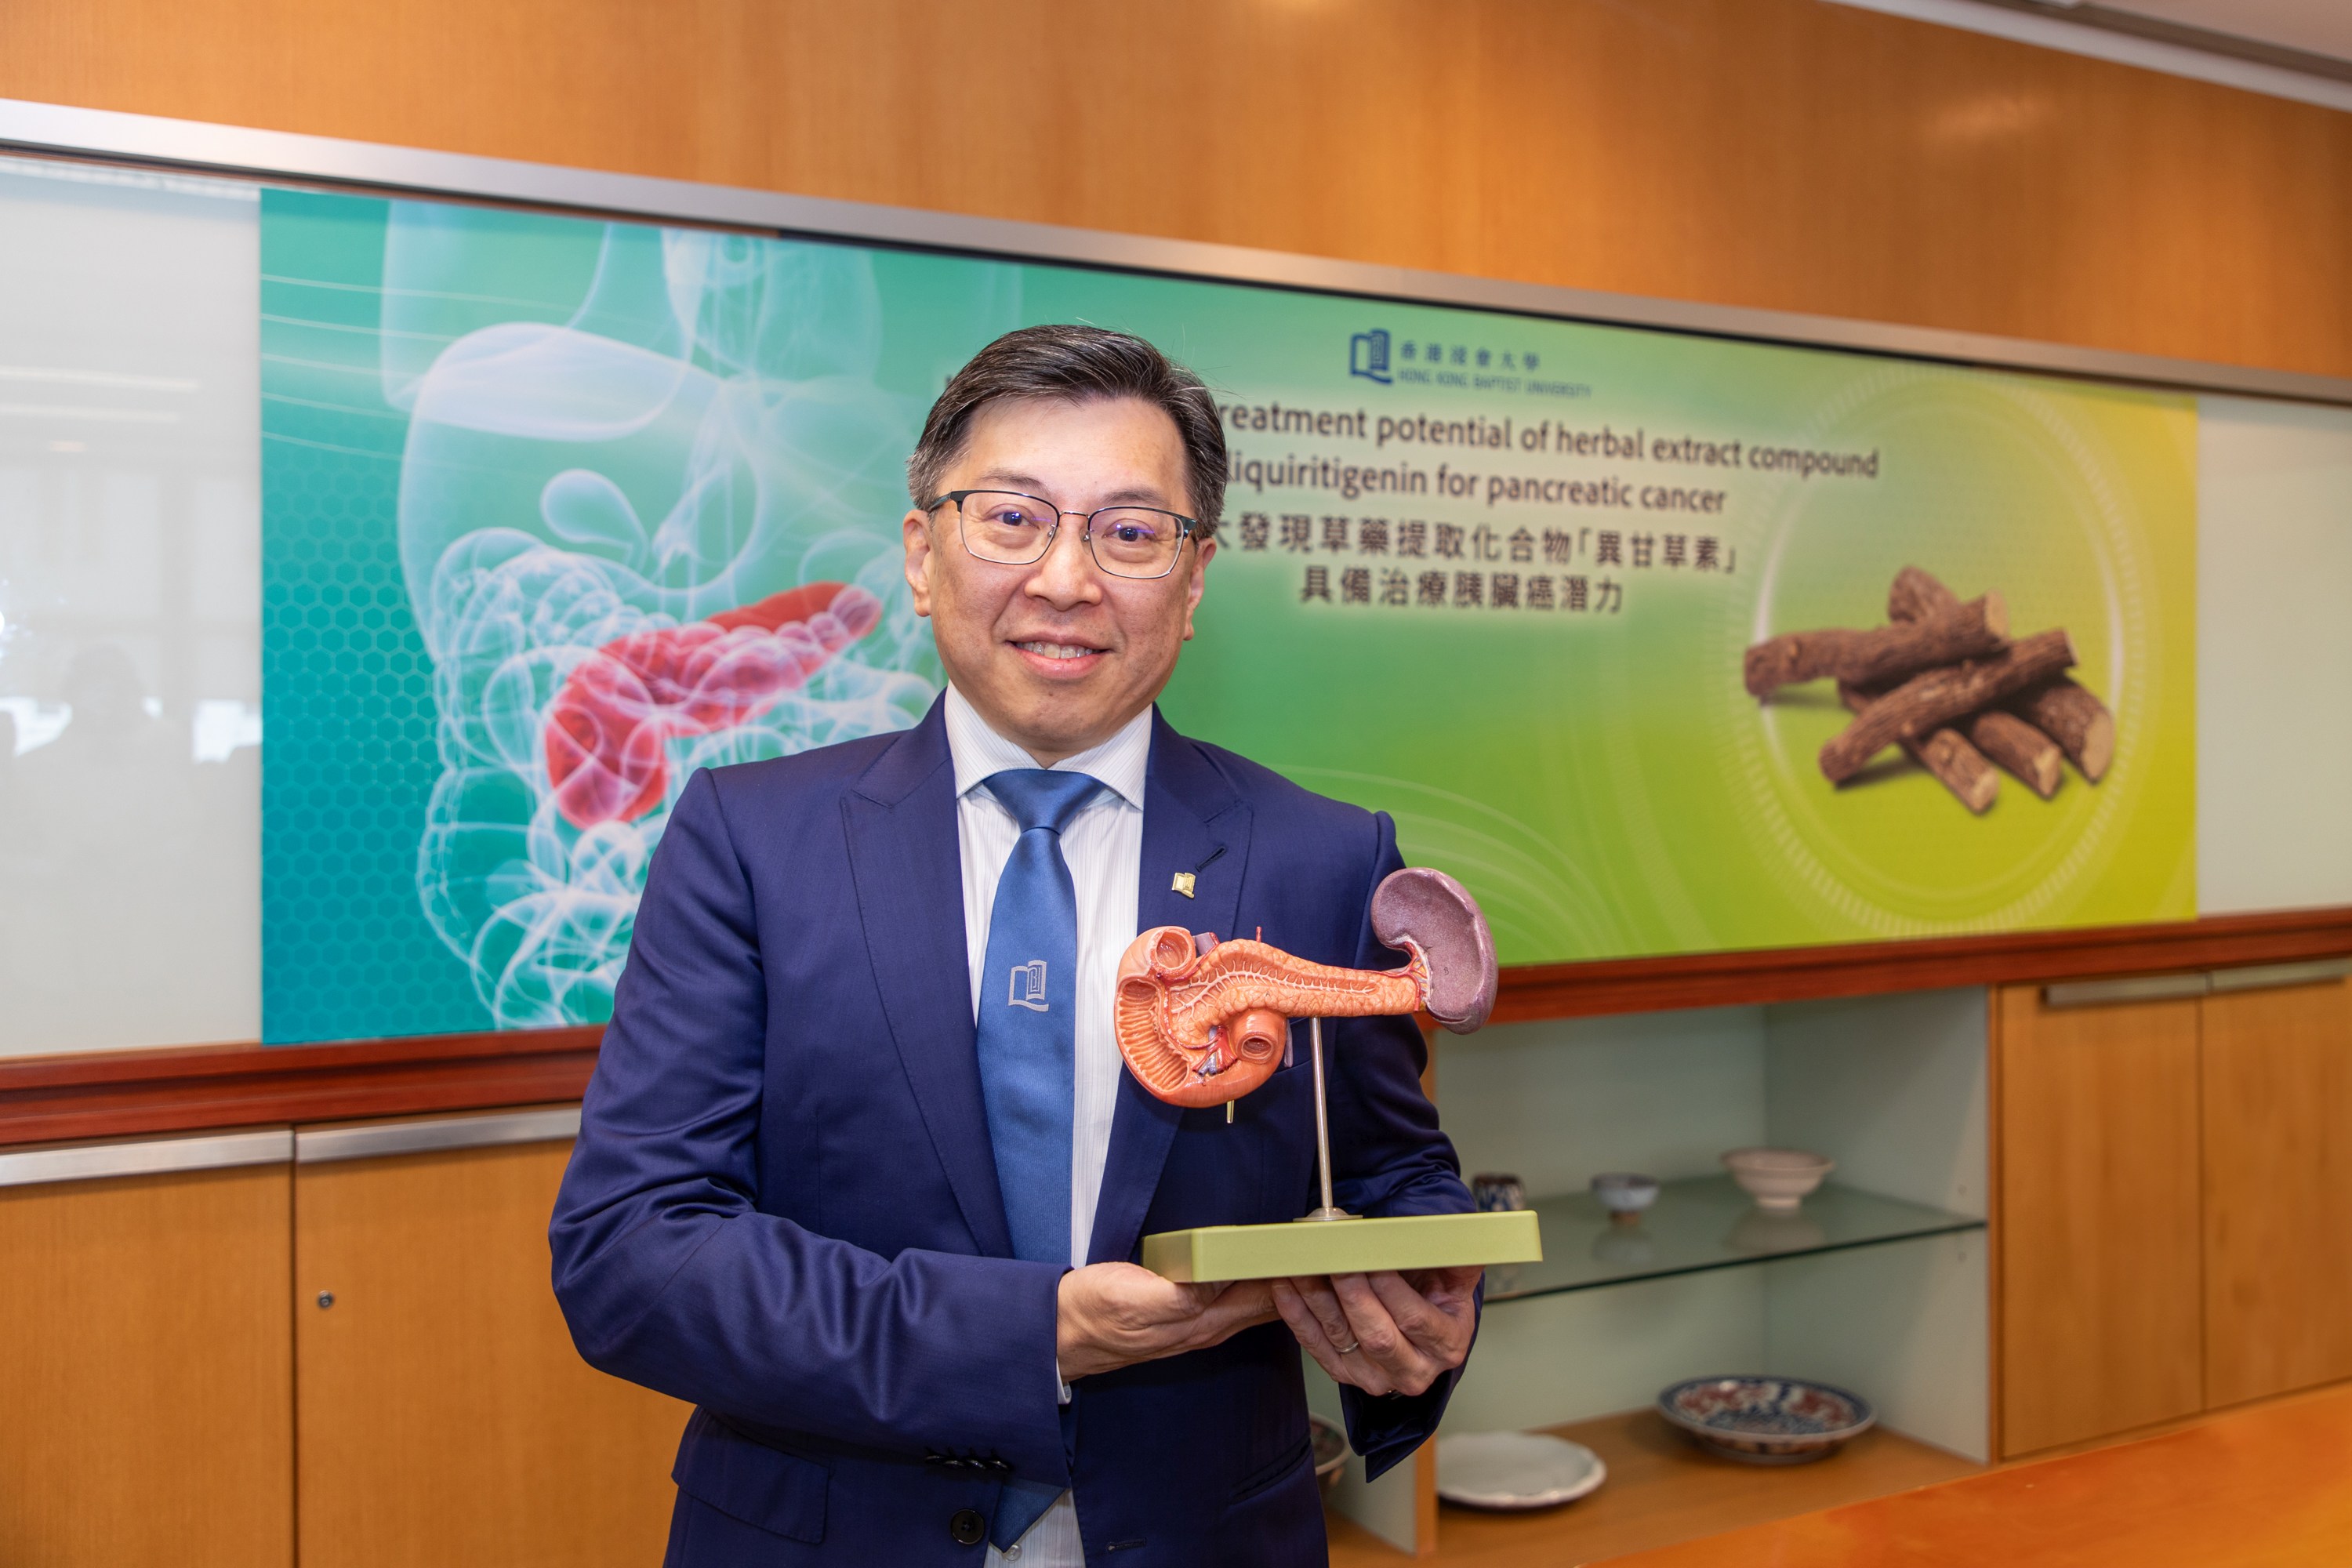 A research team led by Dr Joshua Ko Ka-shun, Associate Professor, Teaching and Research Division of the School of Chinese Medicine at HKBU, found that isoliquiritigenin, a herbal extract compound of the Chinese herbal medicine licorice, can inhibit pancreatic cancer progression.